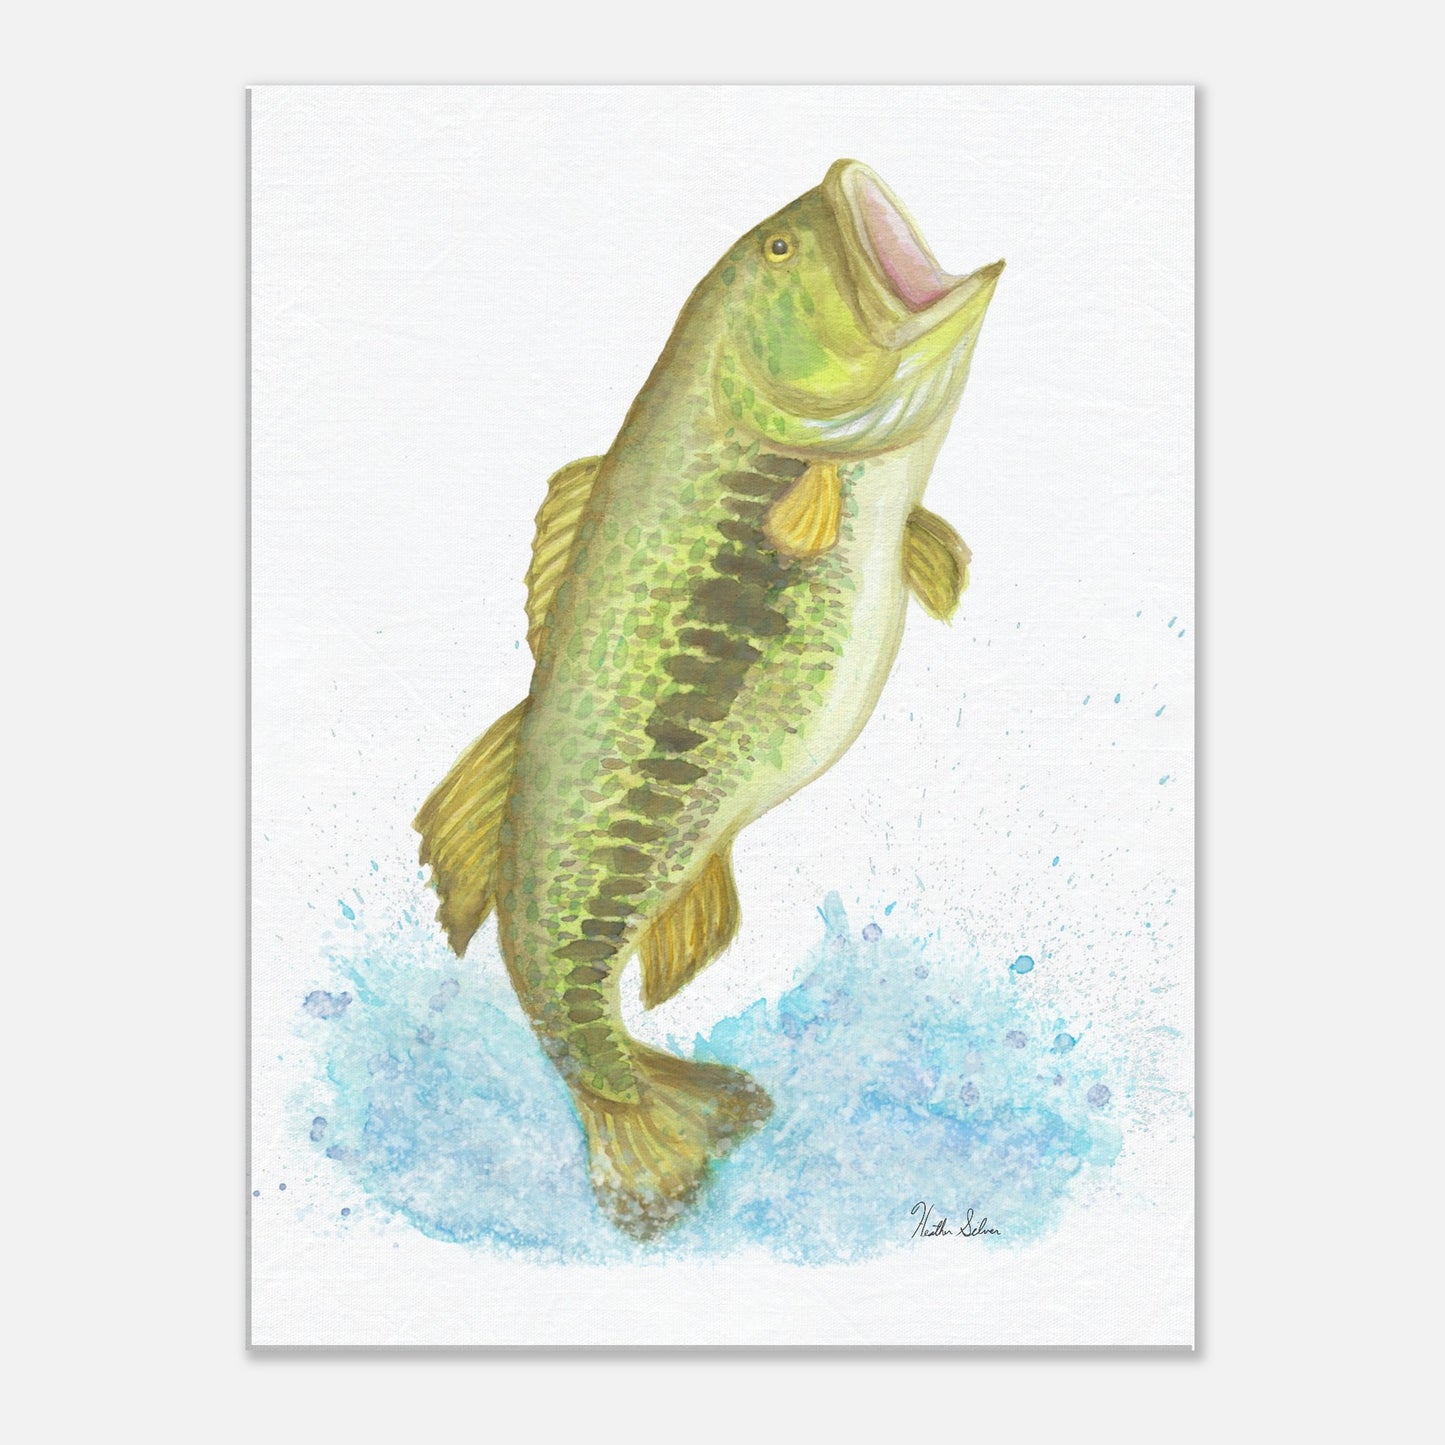 24 by 32 inch slim canvas wall art print featuring a watercolor painting of a largemouth bass leaping from the water. Hanging hardware included.